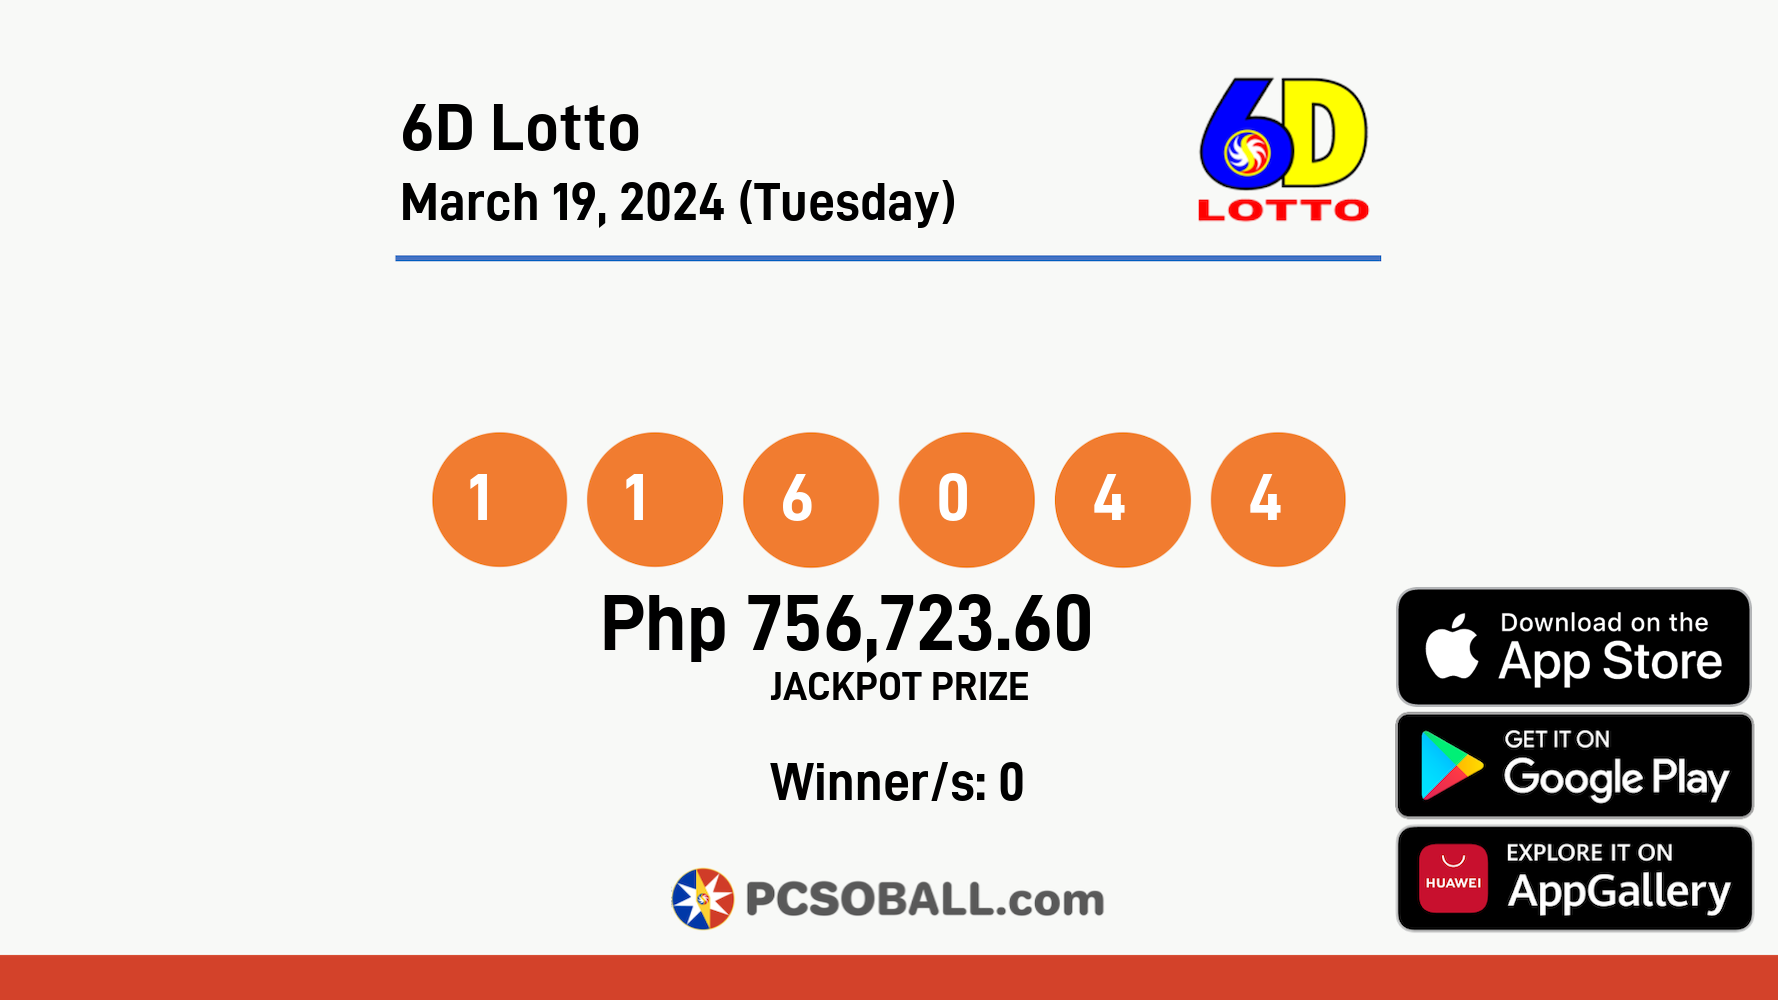 6D Lotto March 19, 2024 (Tuesday) Result